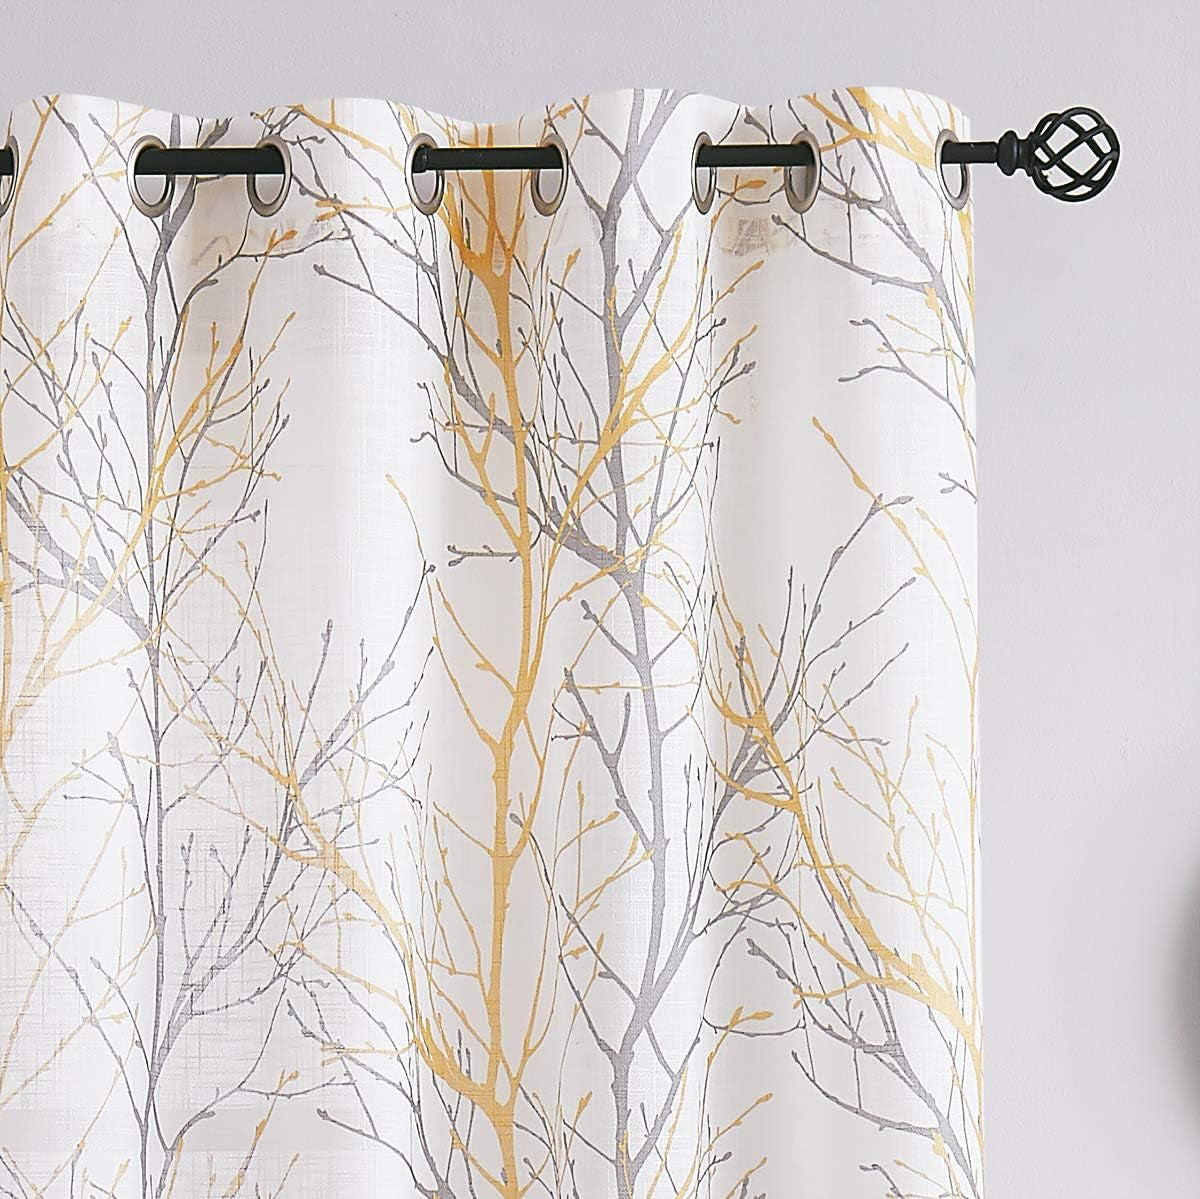 FMFUNCTEX Blue White Curtains for Kitchen Living Room 72“ Grey Tree Branches Print Curtain Set for Small Windows Linen Textured Semi-Sheer Drapes for Bedroom Grommet Top, 2 Panels  Fmfunctex Yellow 50" X 84" |2Pcs 